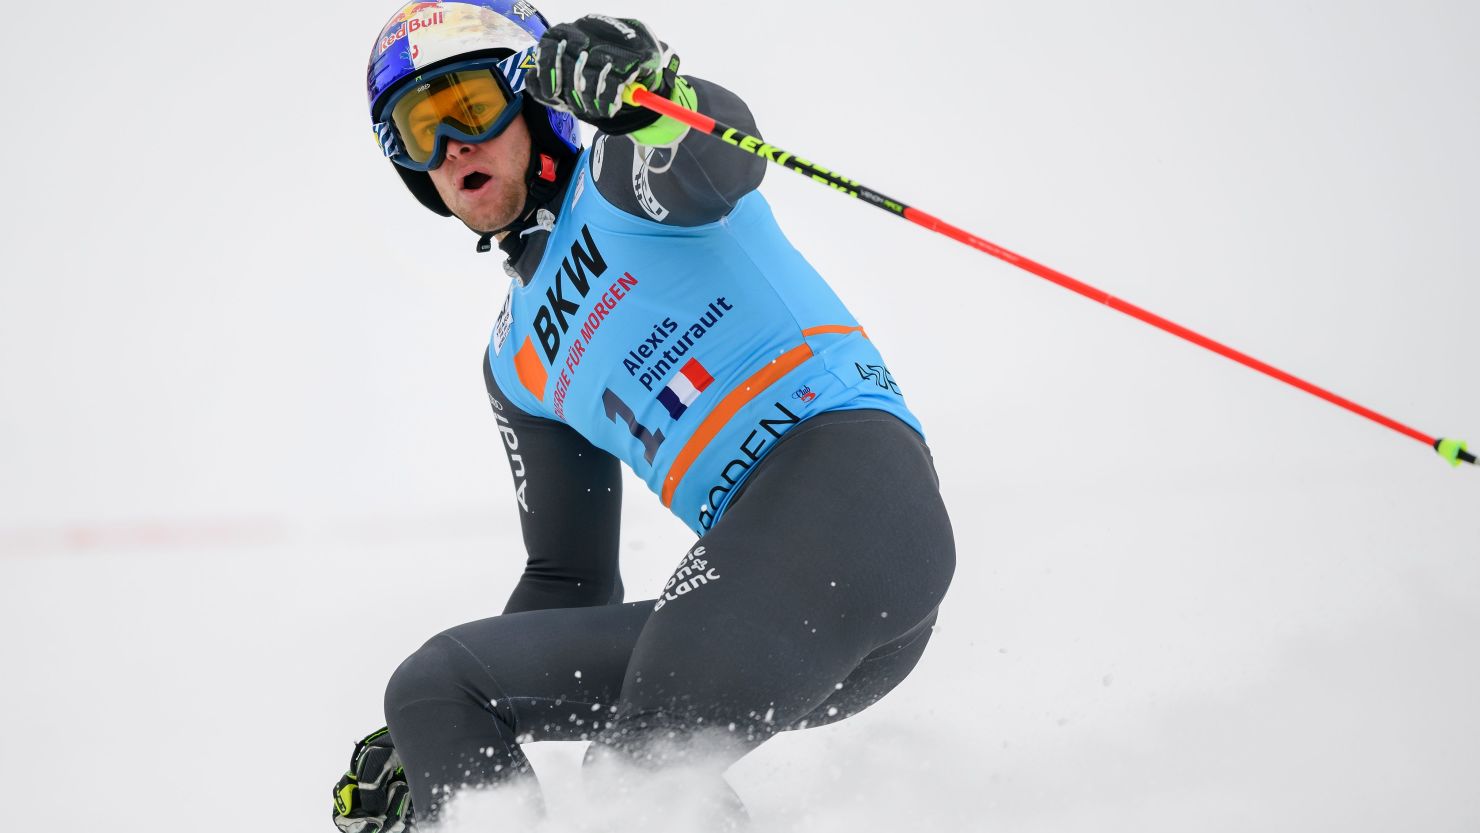 France's Alexis Pinturault wraps up his 19th World Cup victory by claiming a notable giant slalom success.